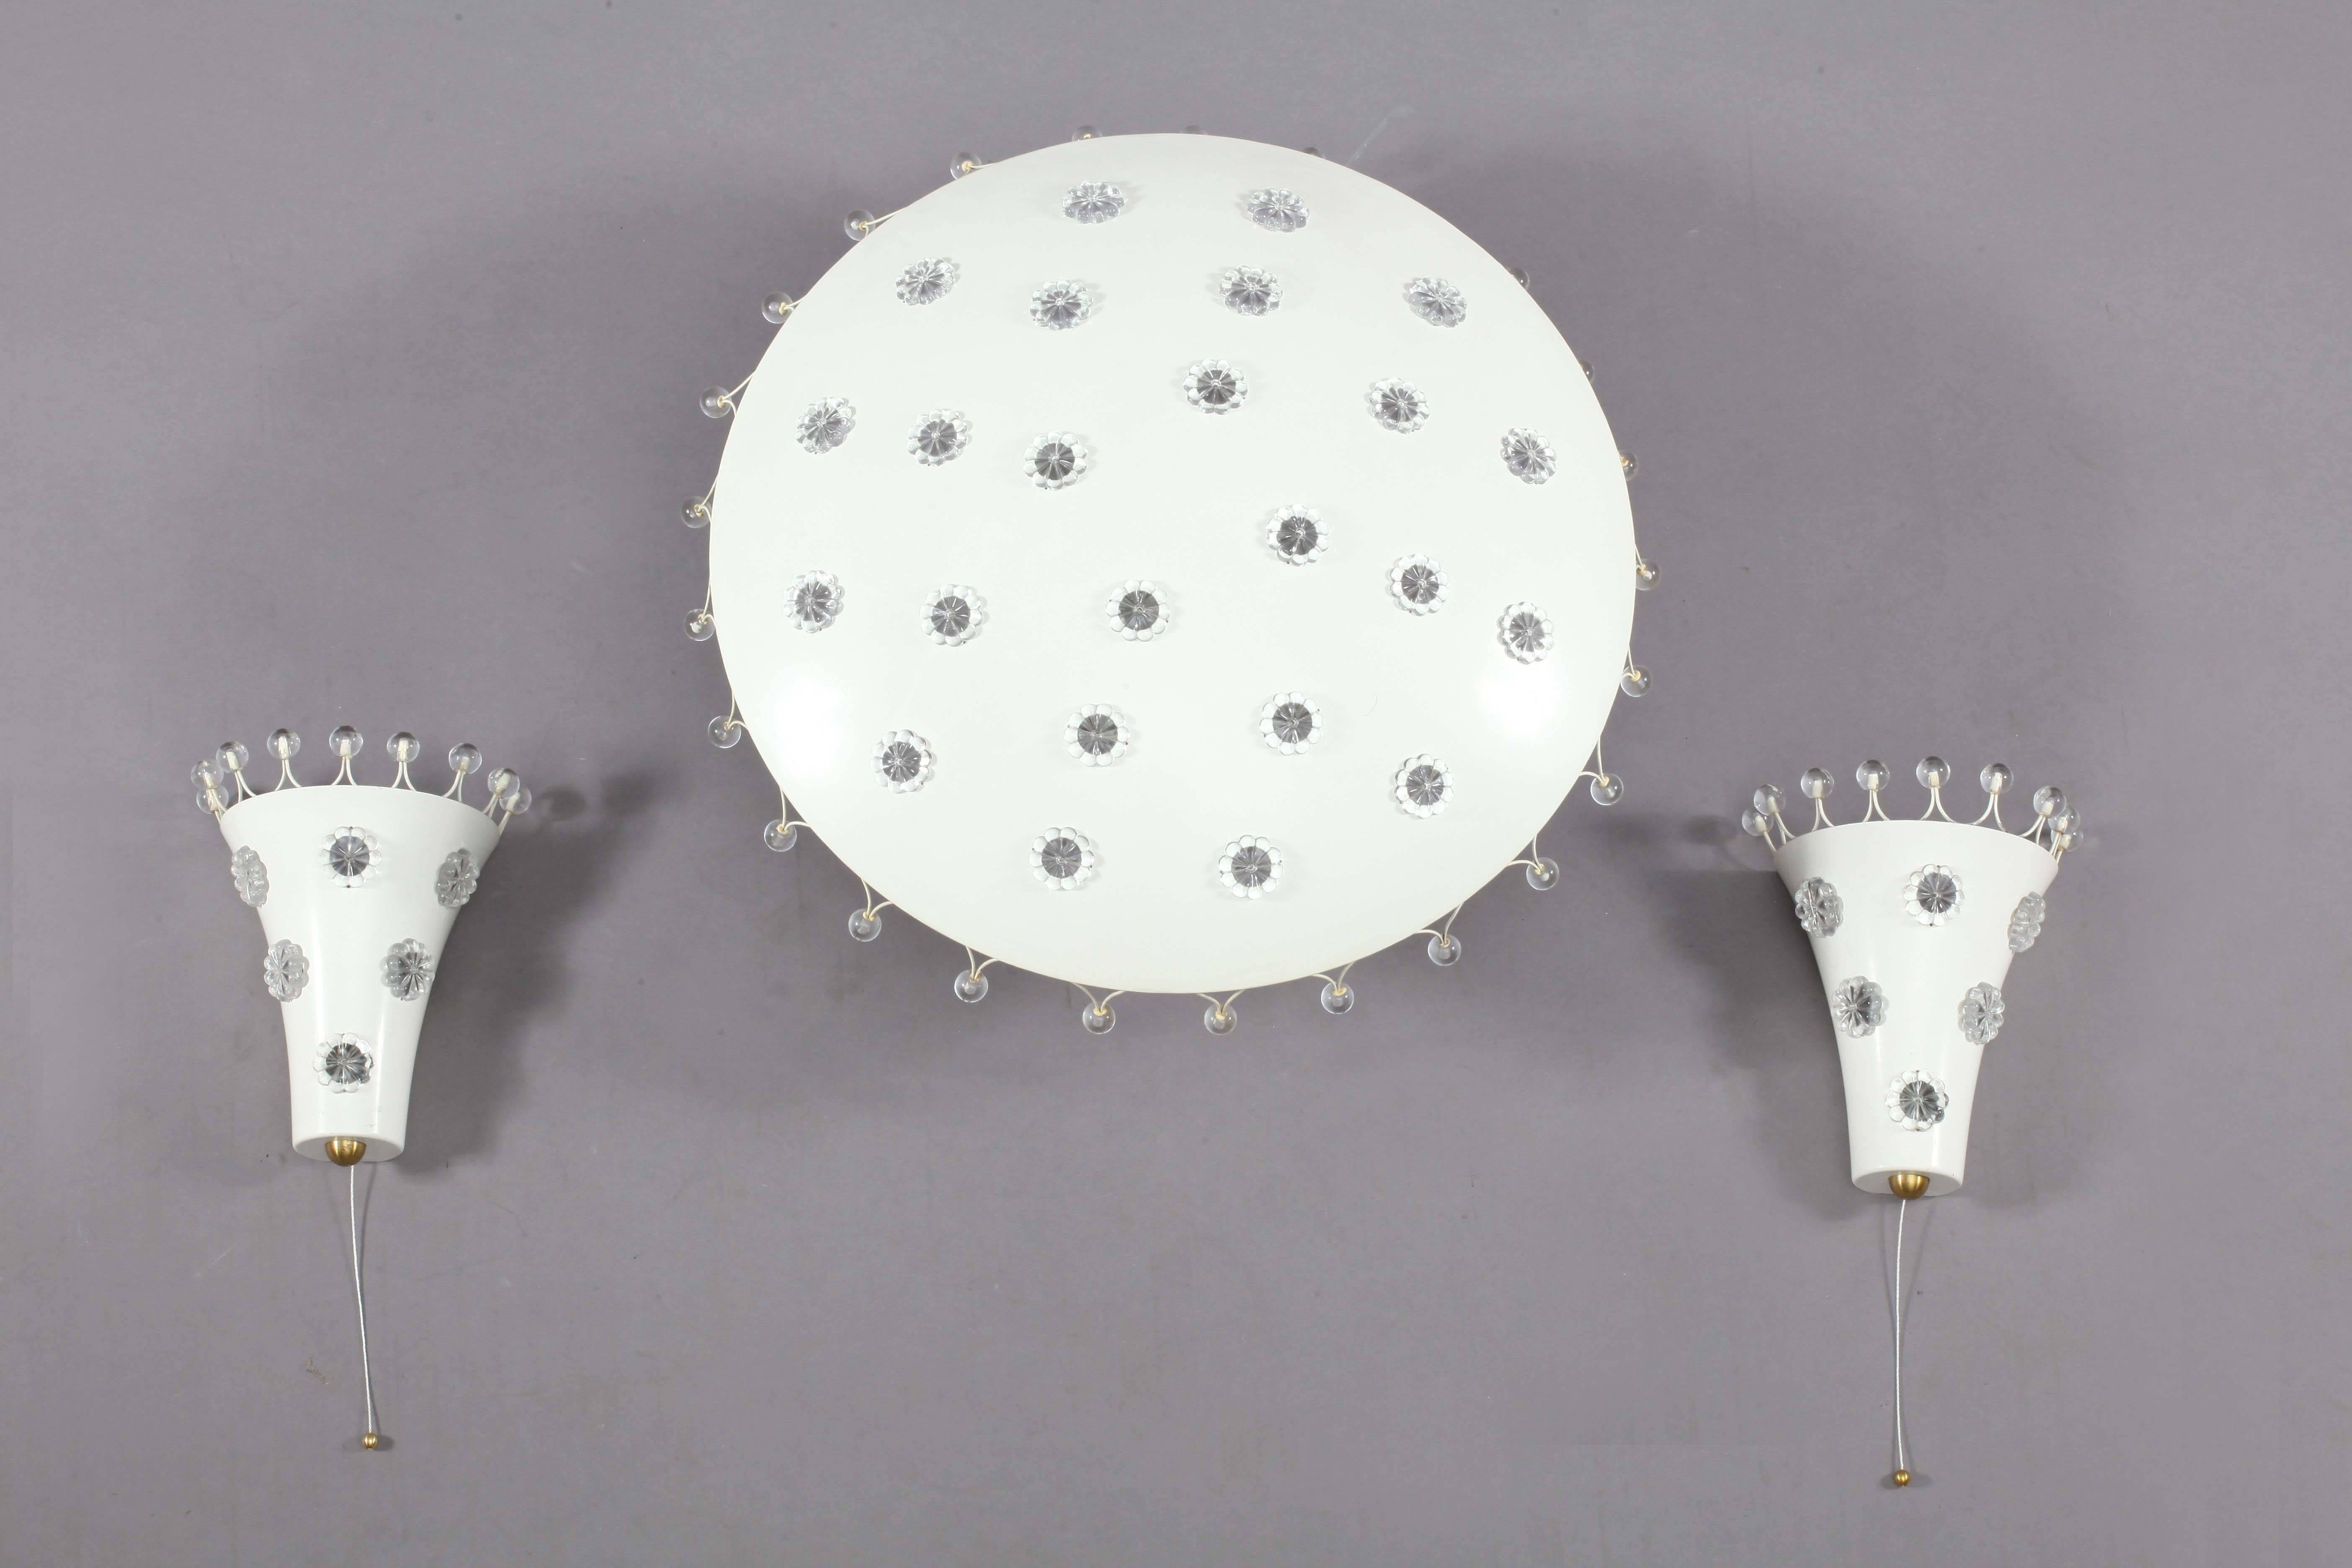 Two wall sconces and a ceiling flush mount,
Rupert Nikoll,
Vienna, 1950.
Lacquered metal, crystal flowers glass balls.